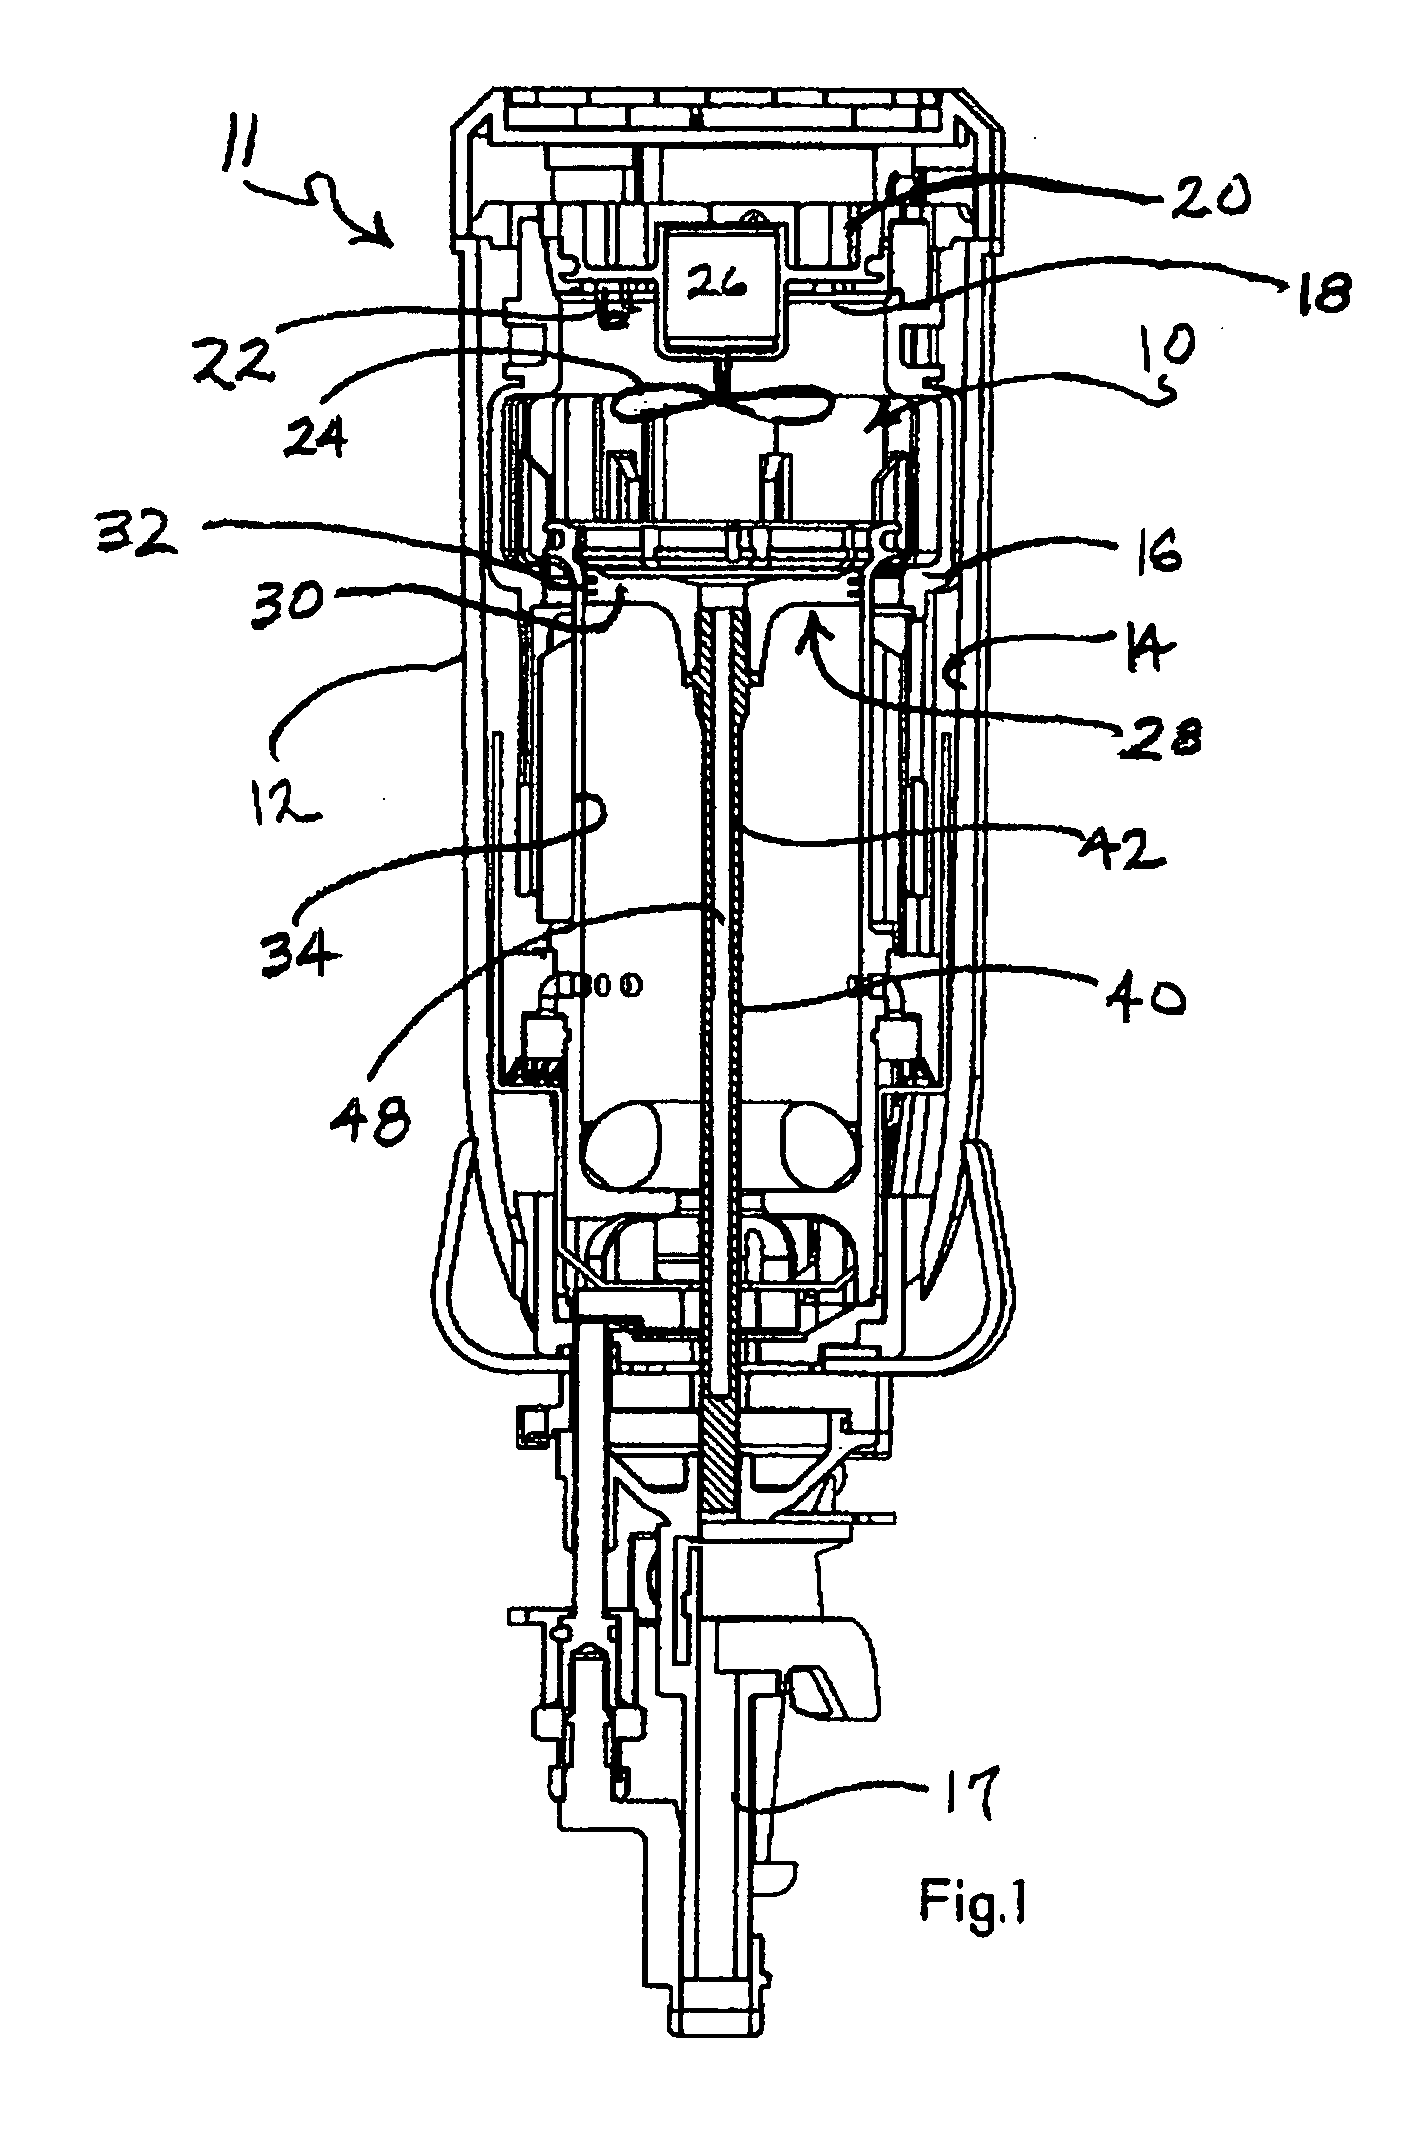 Driver blade with auxiliary combustion chamber for combustion powered fastener-driving tool